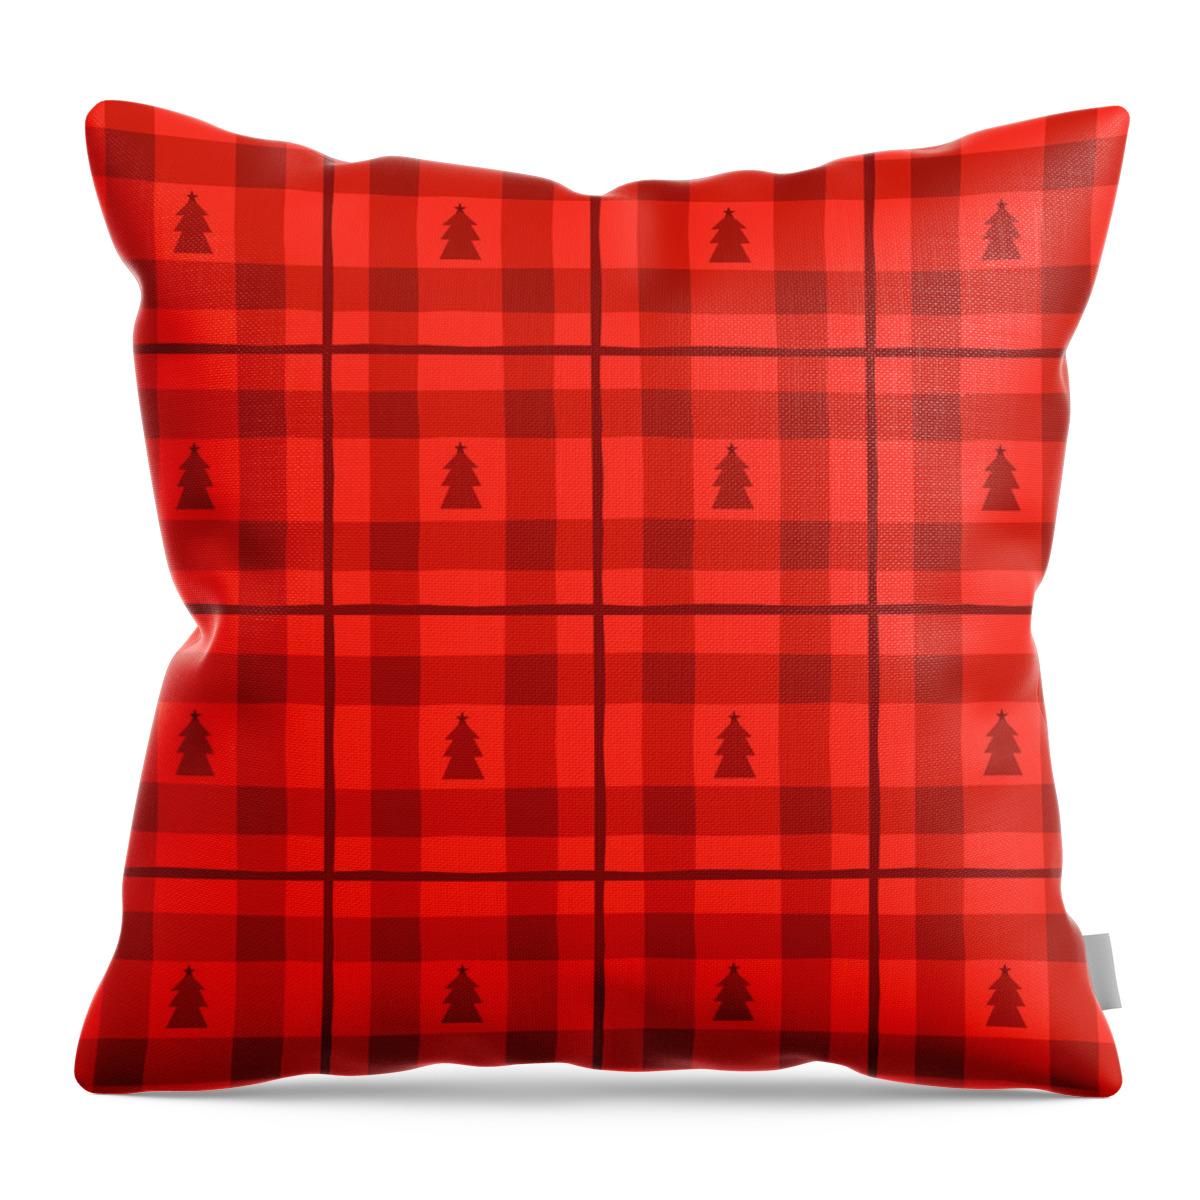 Red Throw Pillow featuring the painting Red Plaid Christmas Tree Pattern - Art by Jen Montgomery by Jen Montgomery